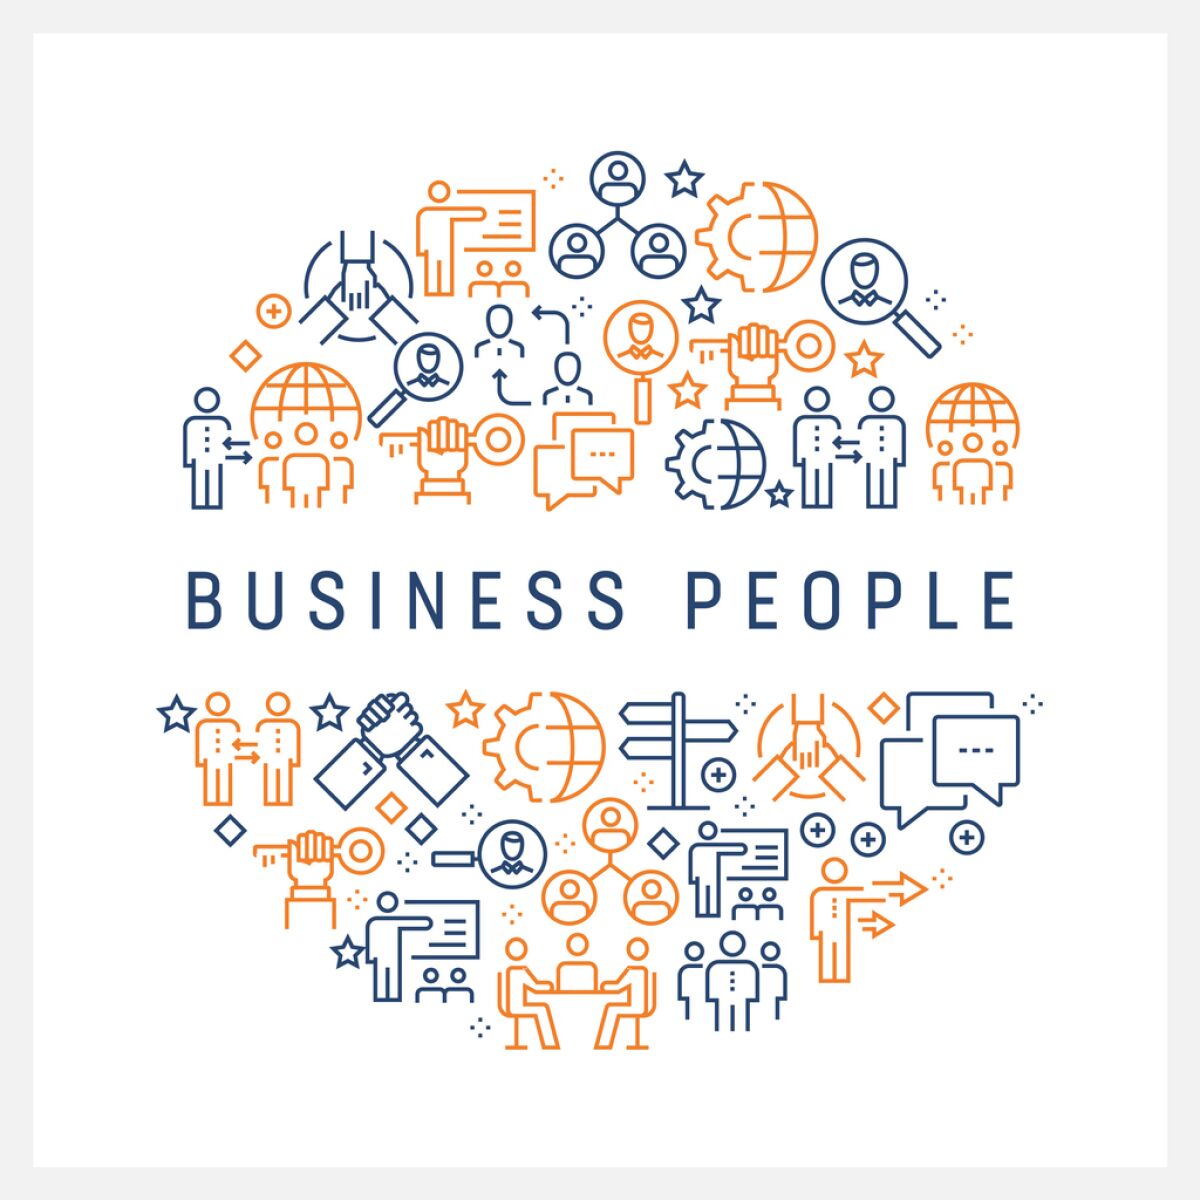 Business people logo and art concept.